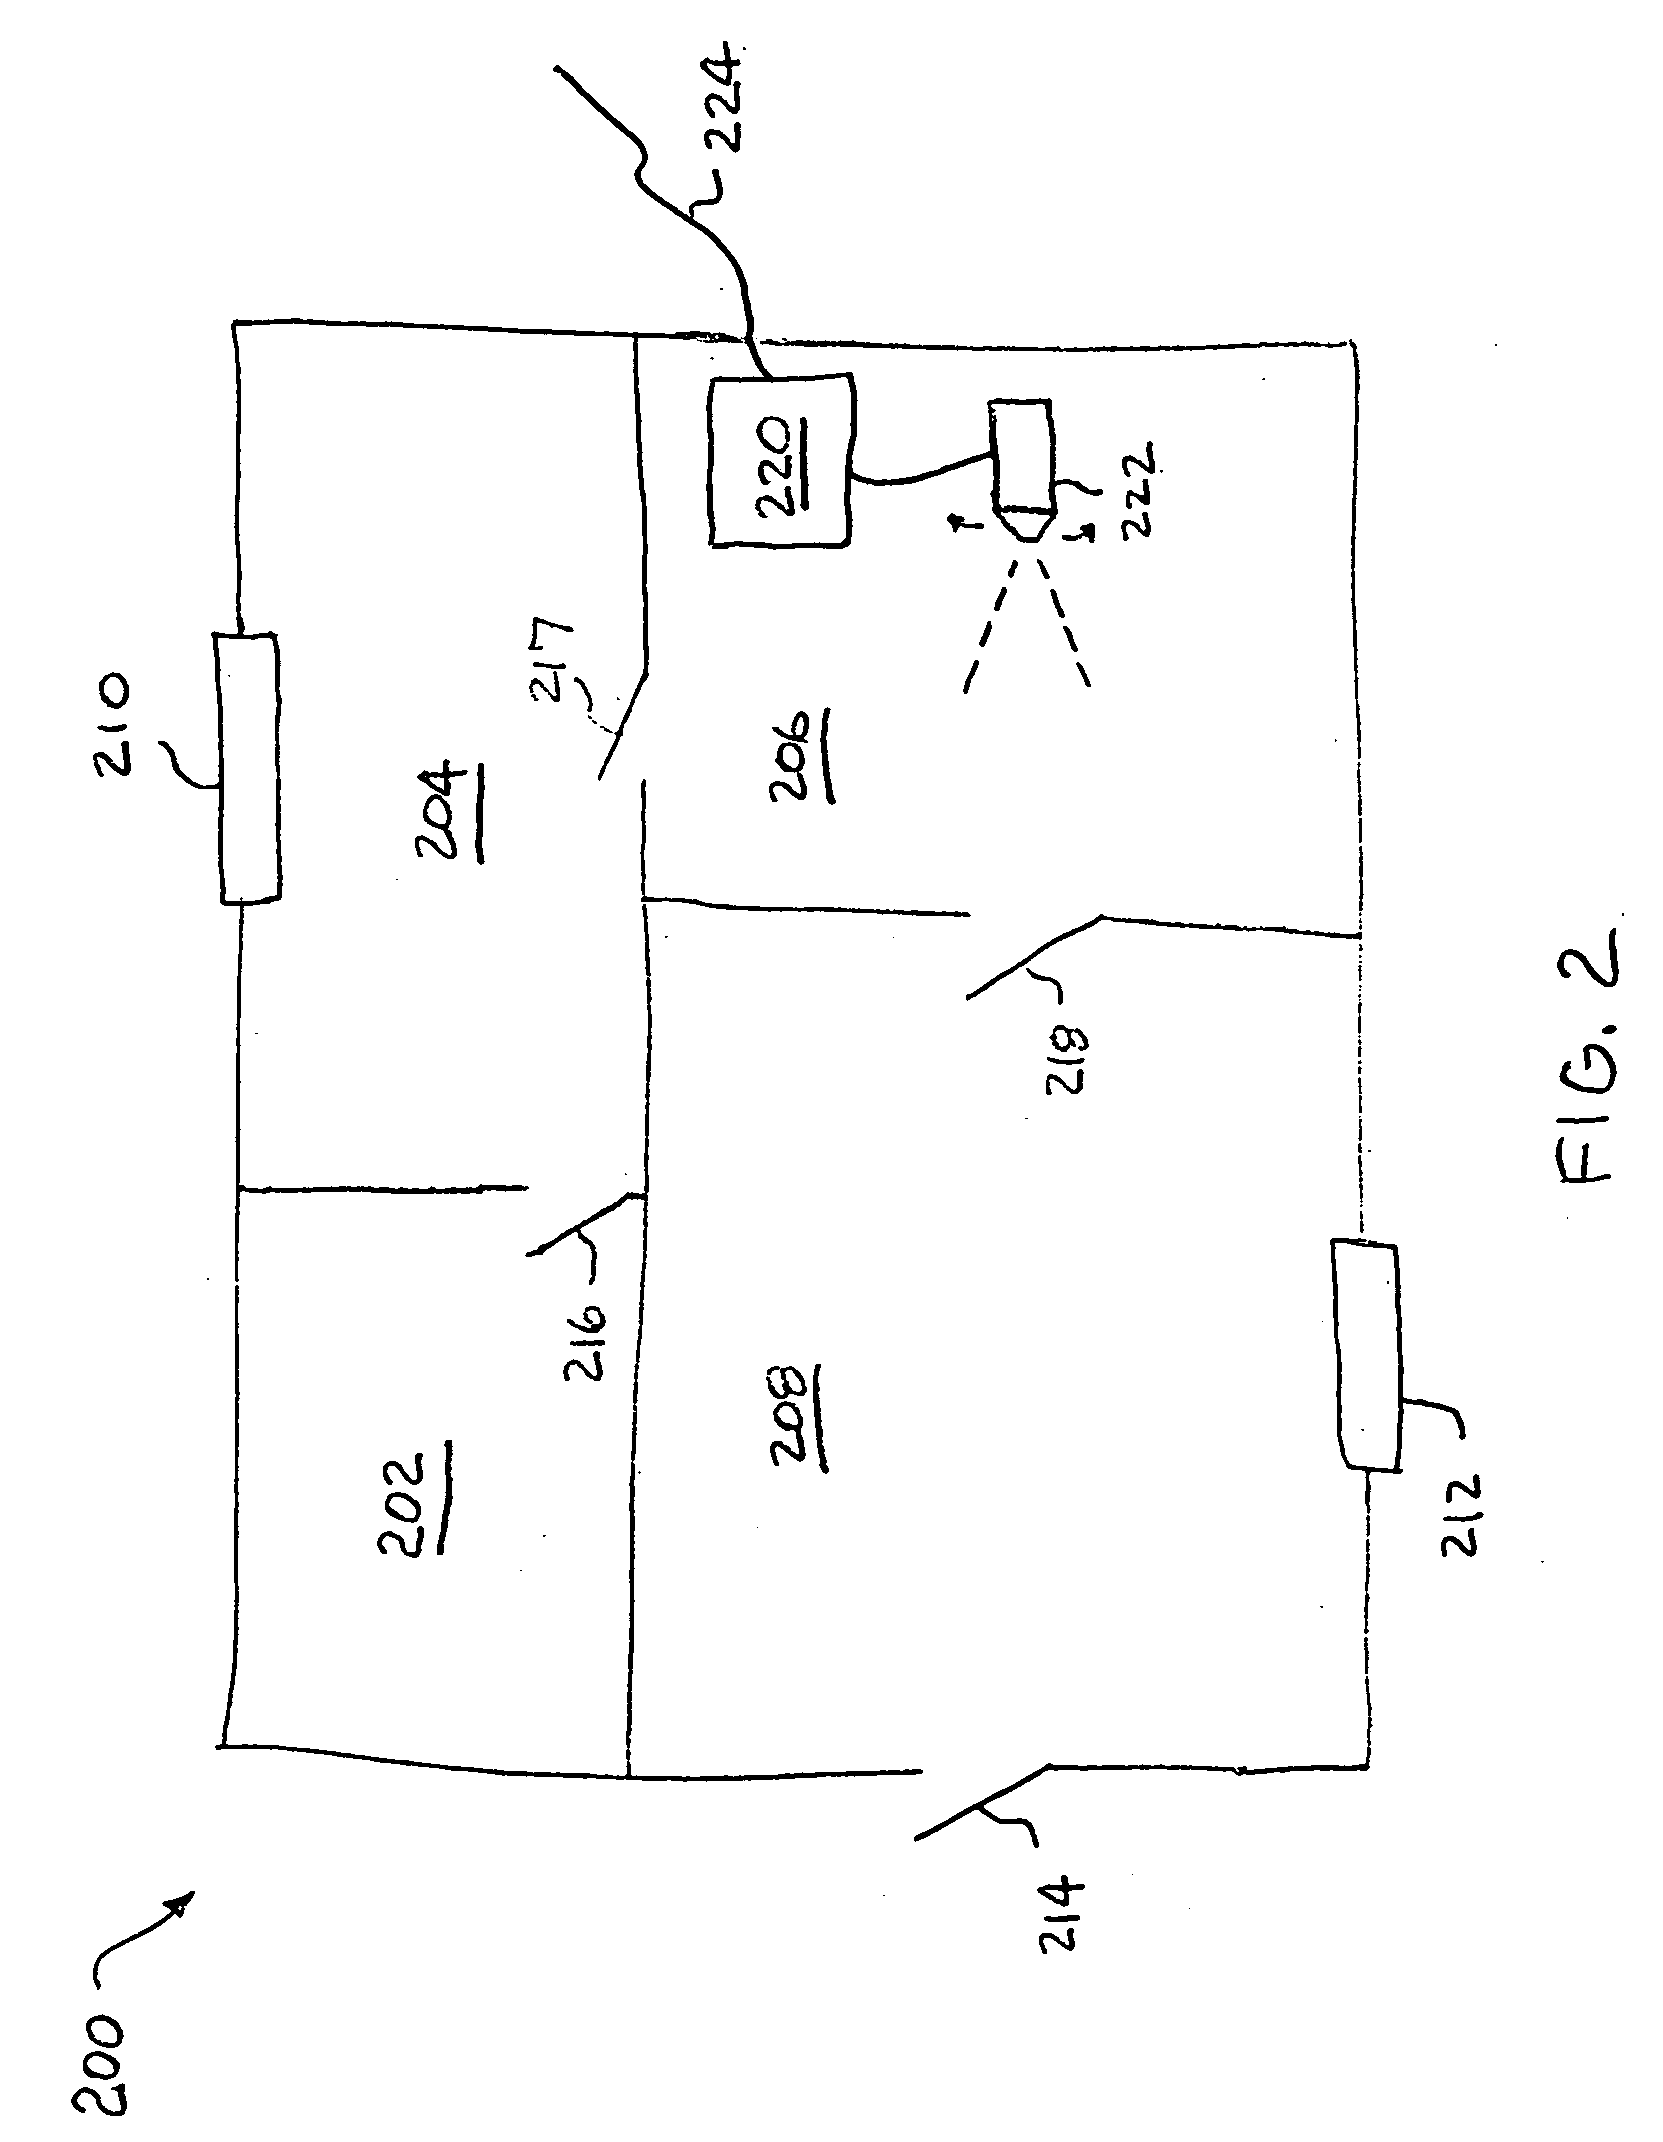 Methods for remote monitoring and control of appliances over a computer network